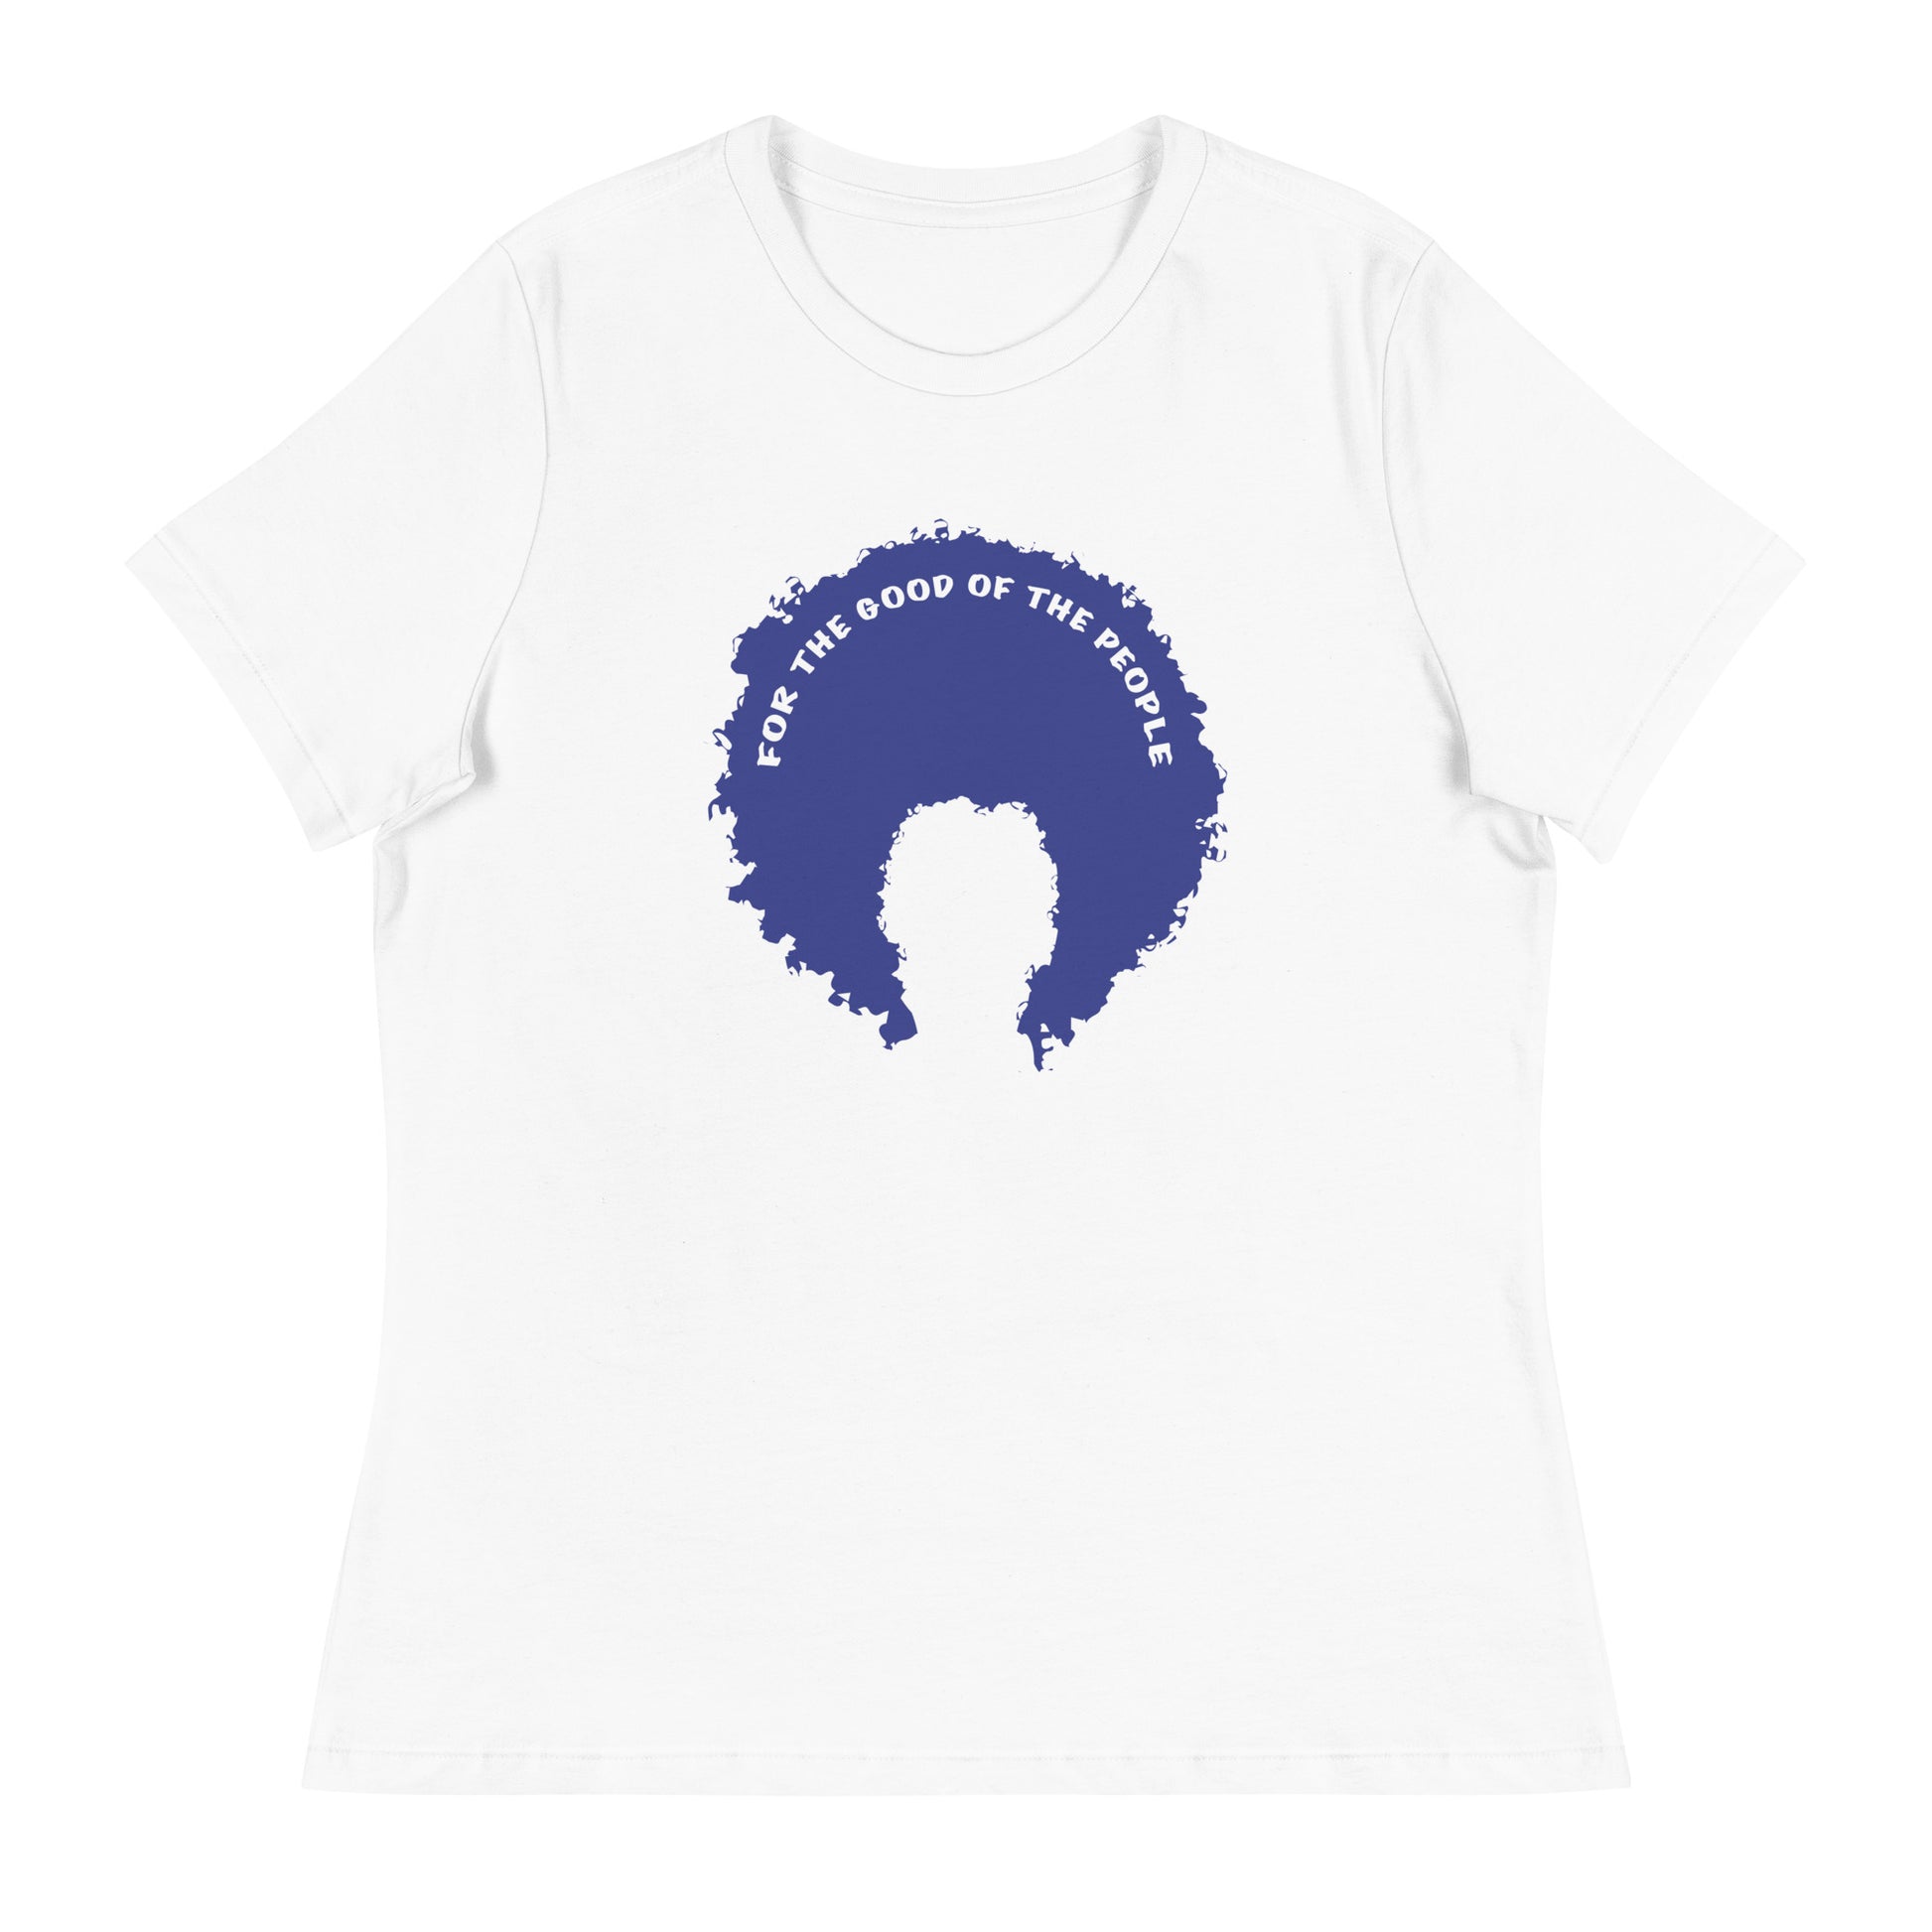 White women's tee with blue afro graphic trimmed in white with for the good of the people in white on the inside top of the afro.